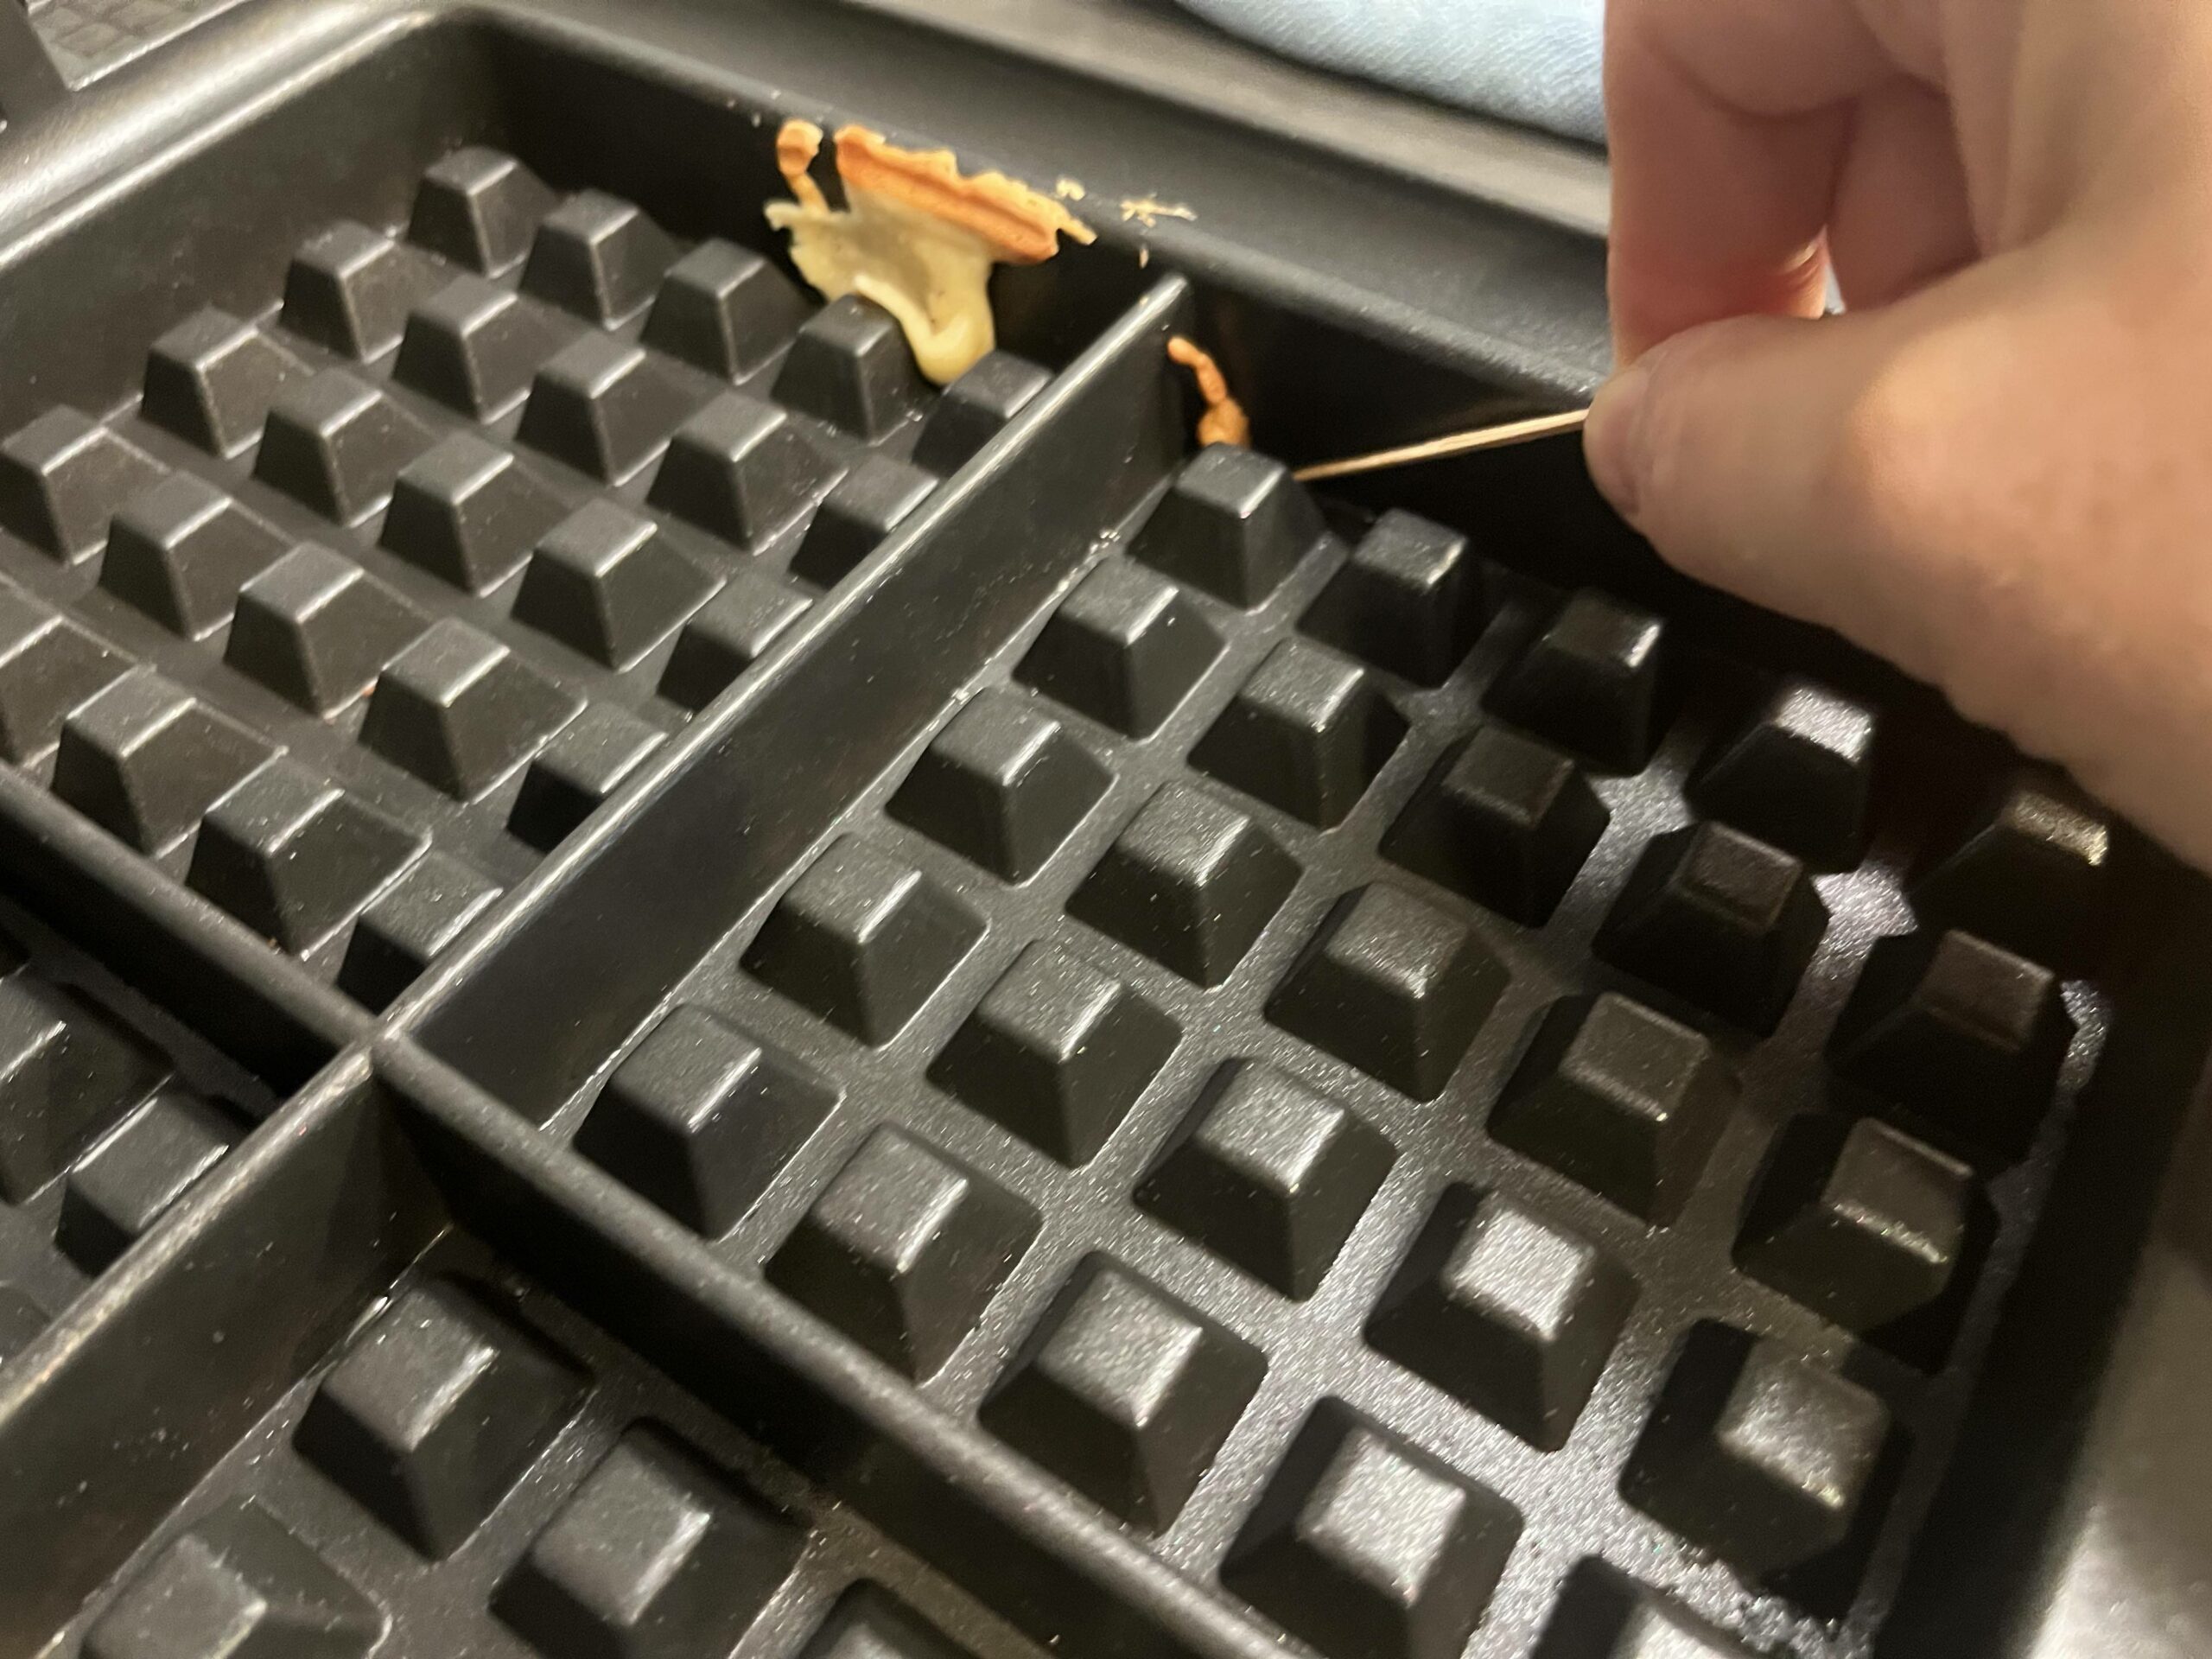 Cleaning Waffle Iron With Toothpick